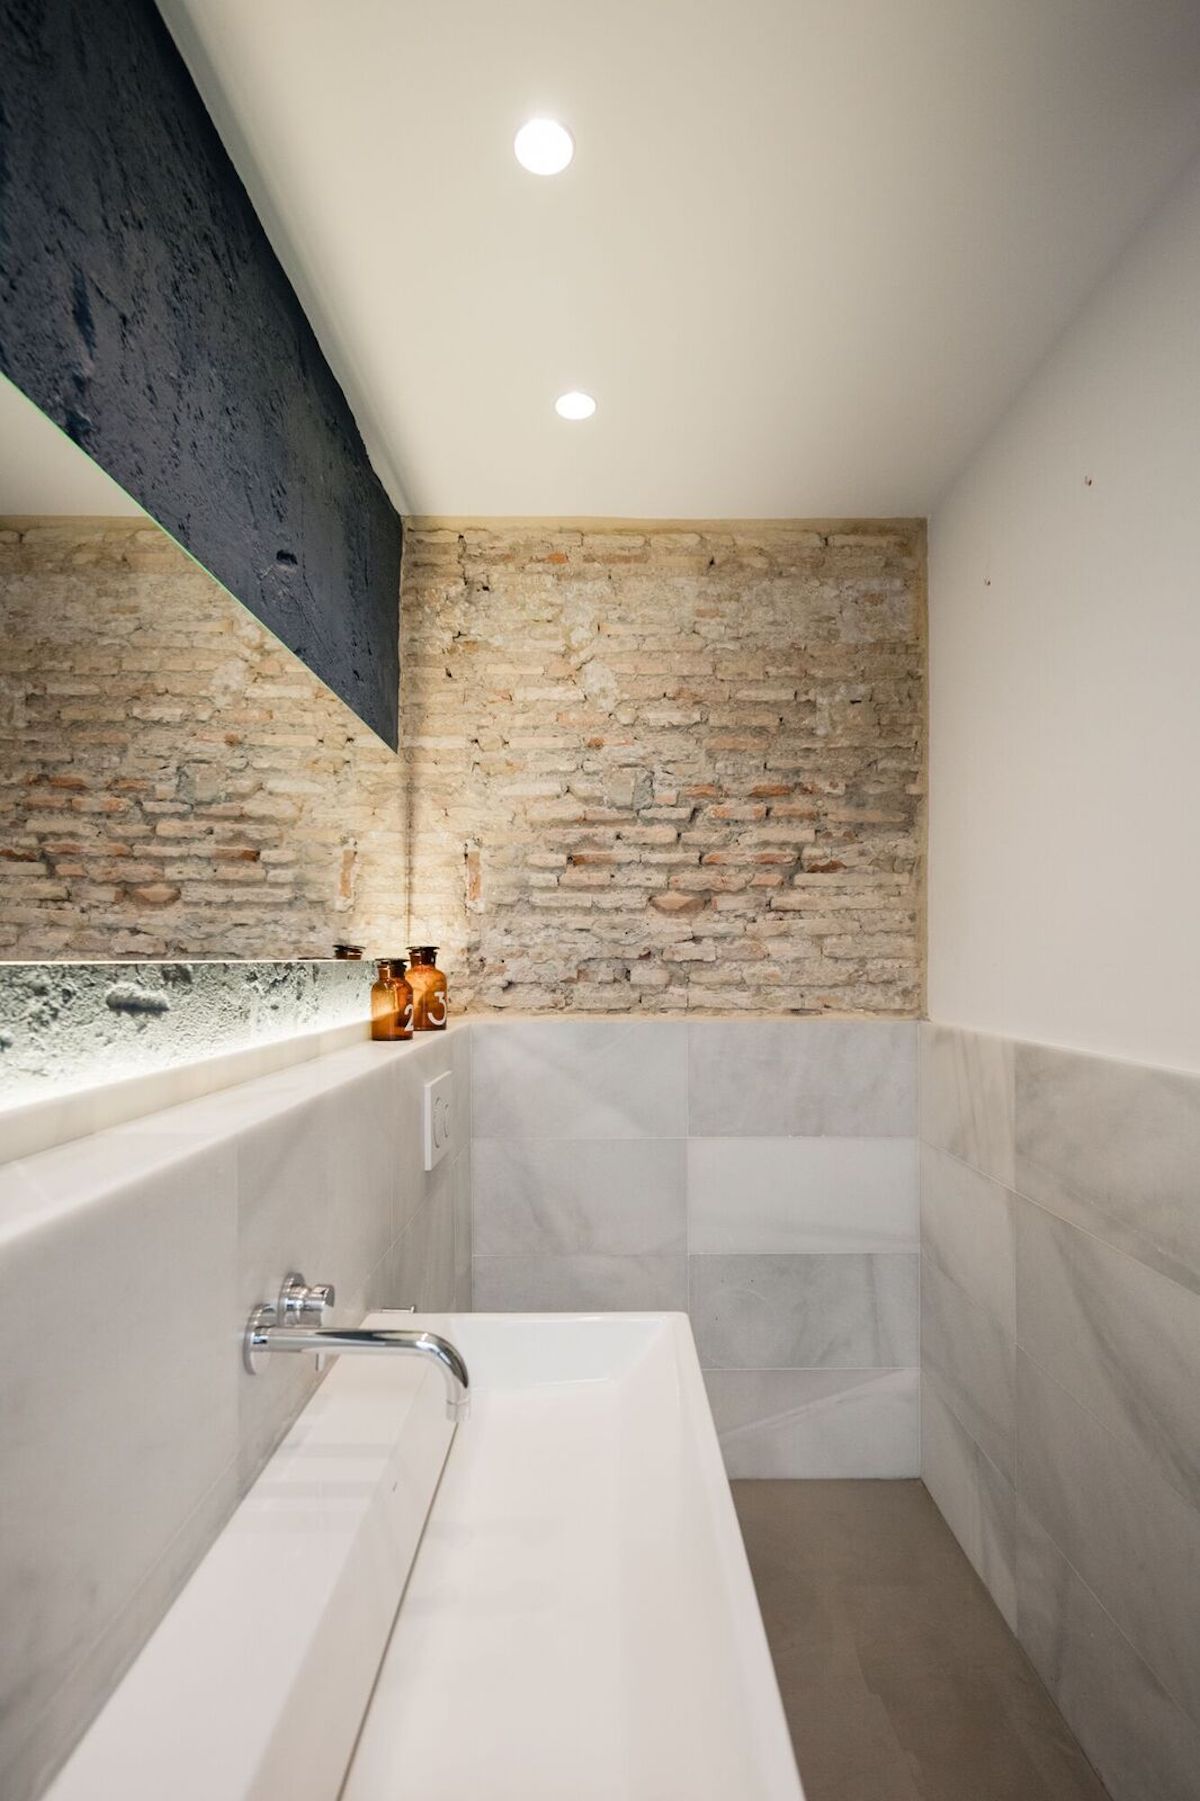 The bathroom also features exposed brick like everywhere else, built in lights and marble